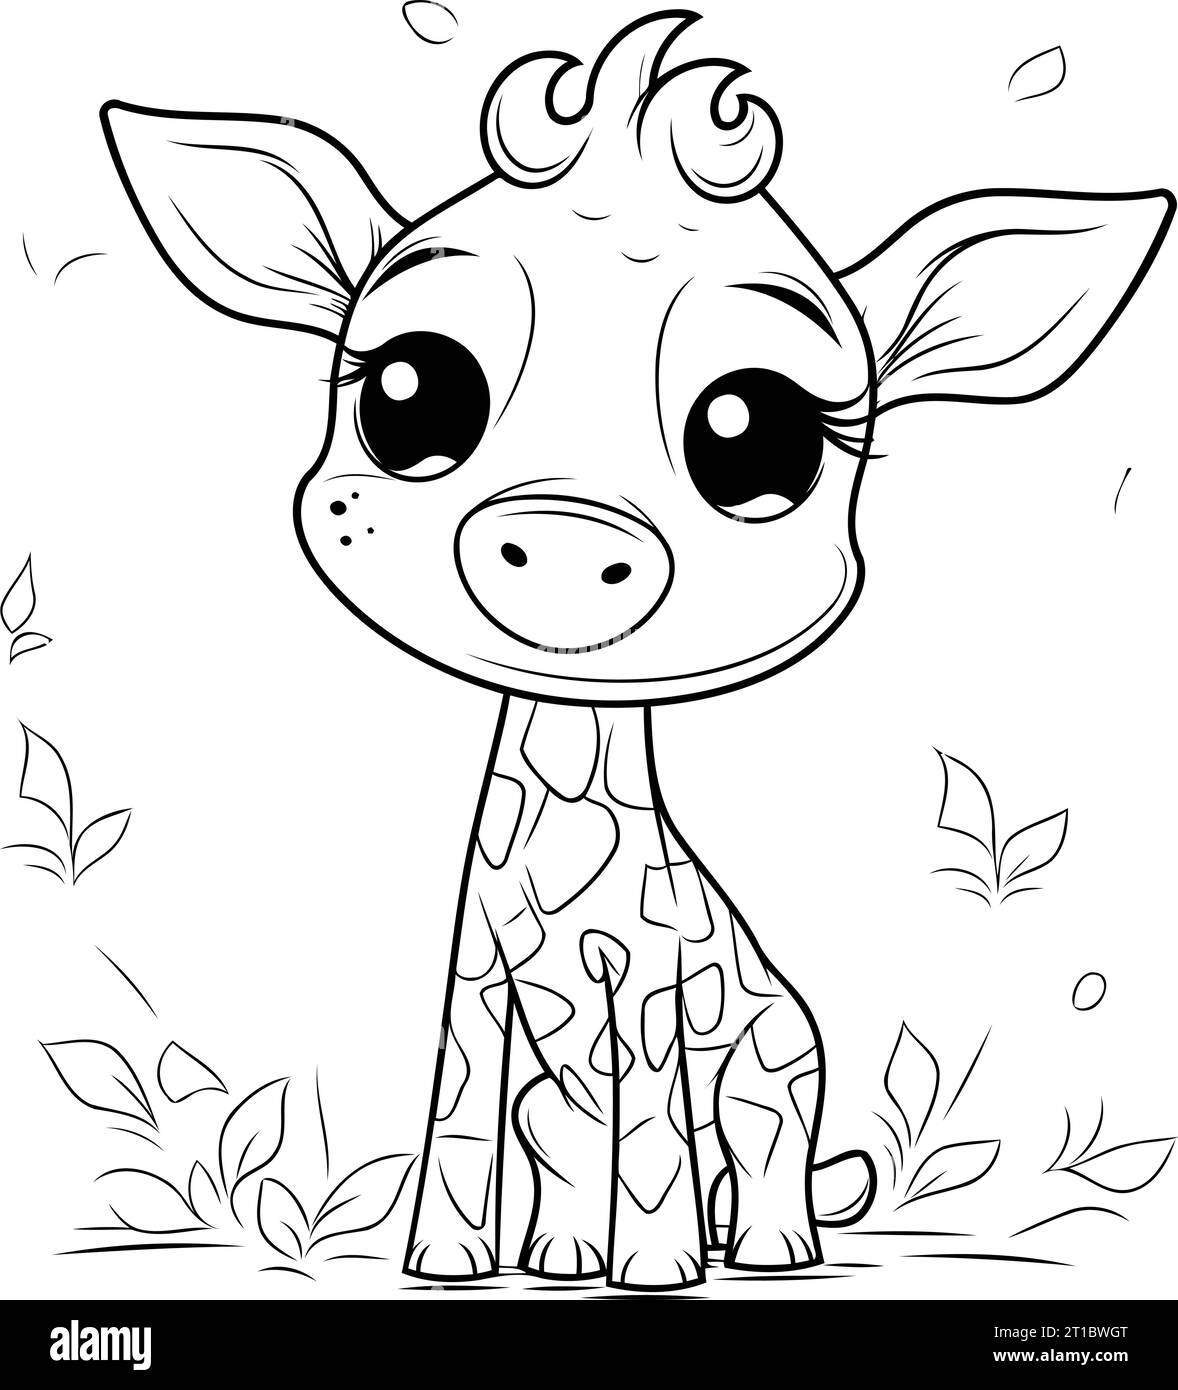 Coloring pages for children. Cute cartoon baby giraffe. Stock Vector